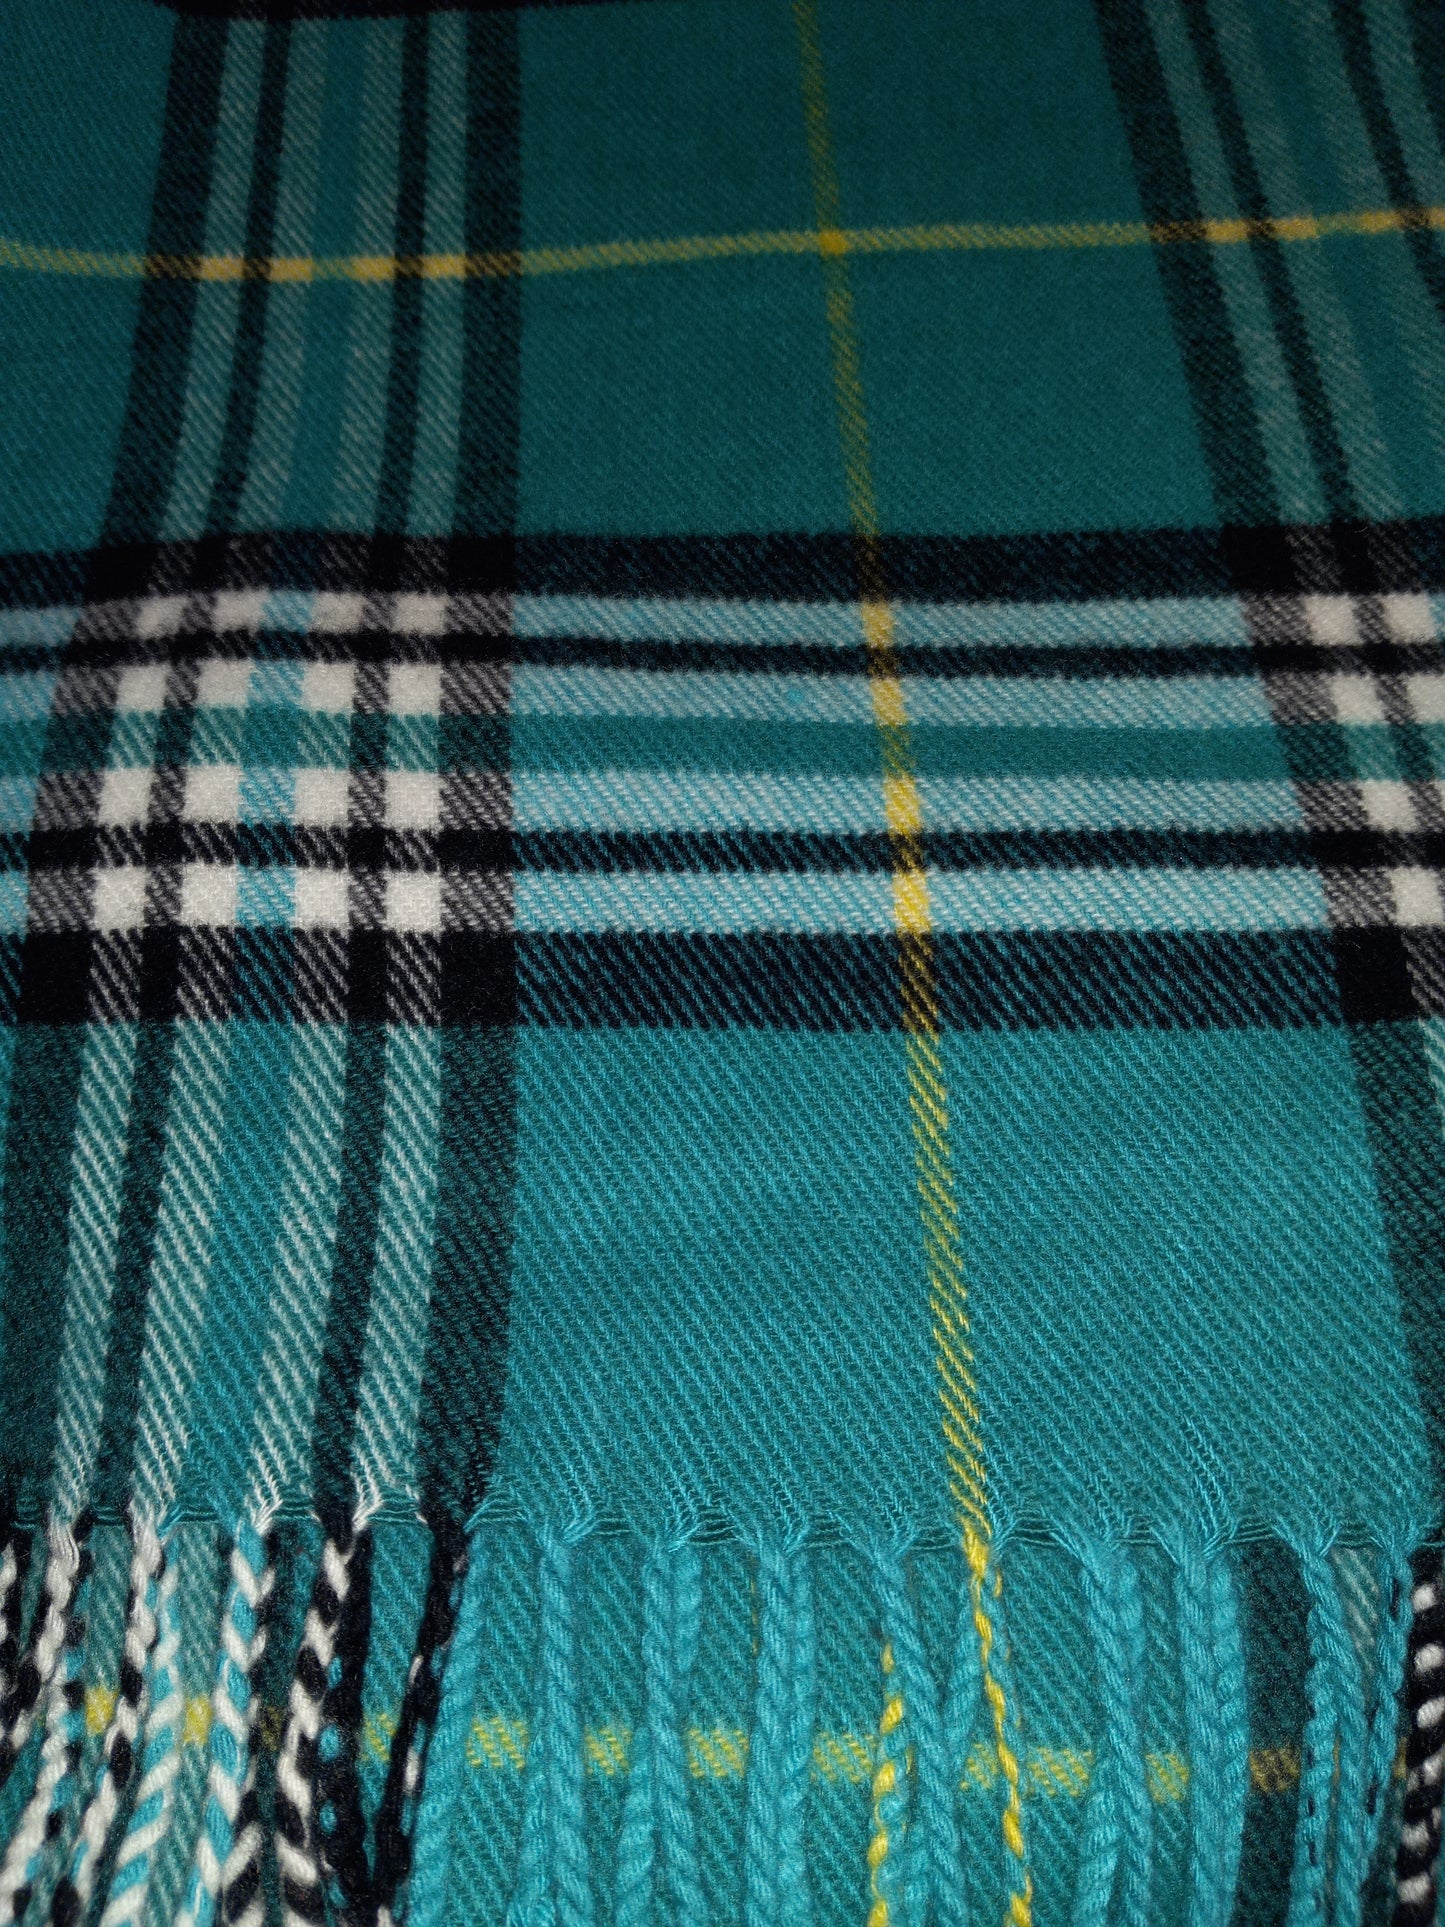 The Plaid Long Cashmere Scarf